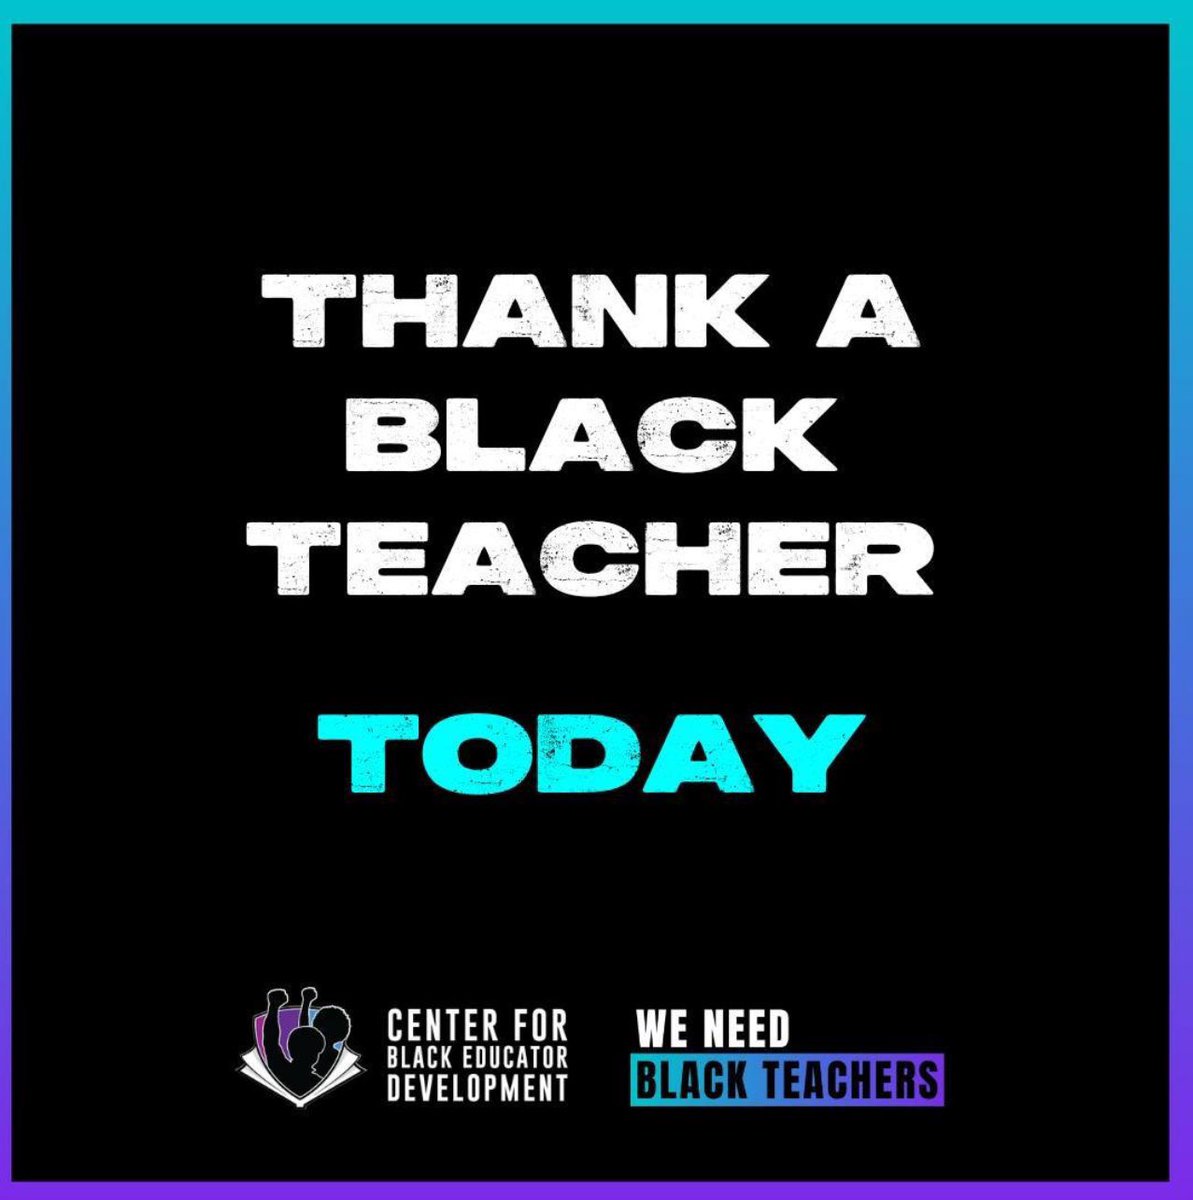 I am who I am because of Black women who poured into me my 1st two years in education. Kecia Ryan, Renee Stancil, Sharon Pullium, Gail Petersen, Sandra Mack (RIP), and numerous others. Black women educators paved the way for all educators. #thankaBlackteacher